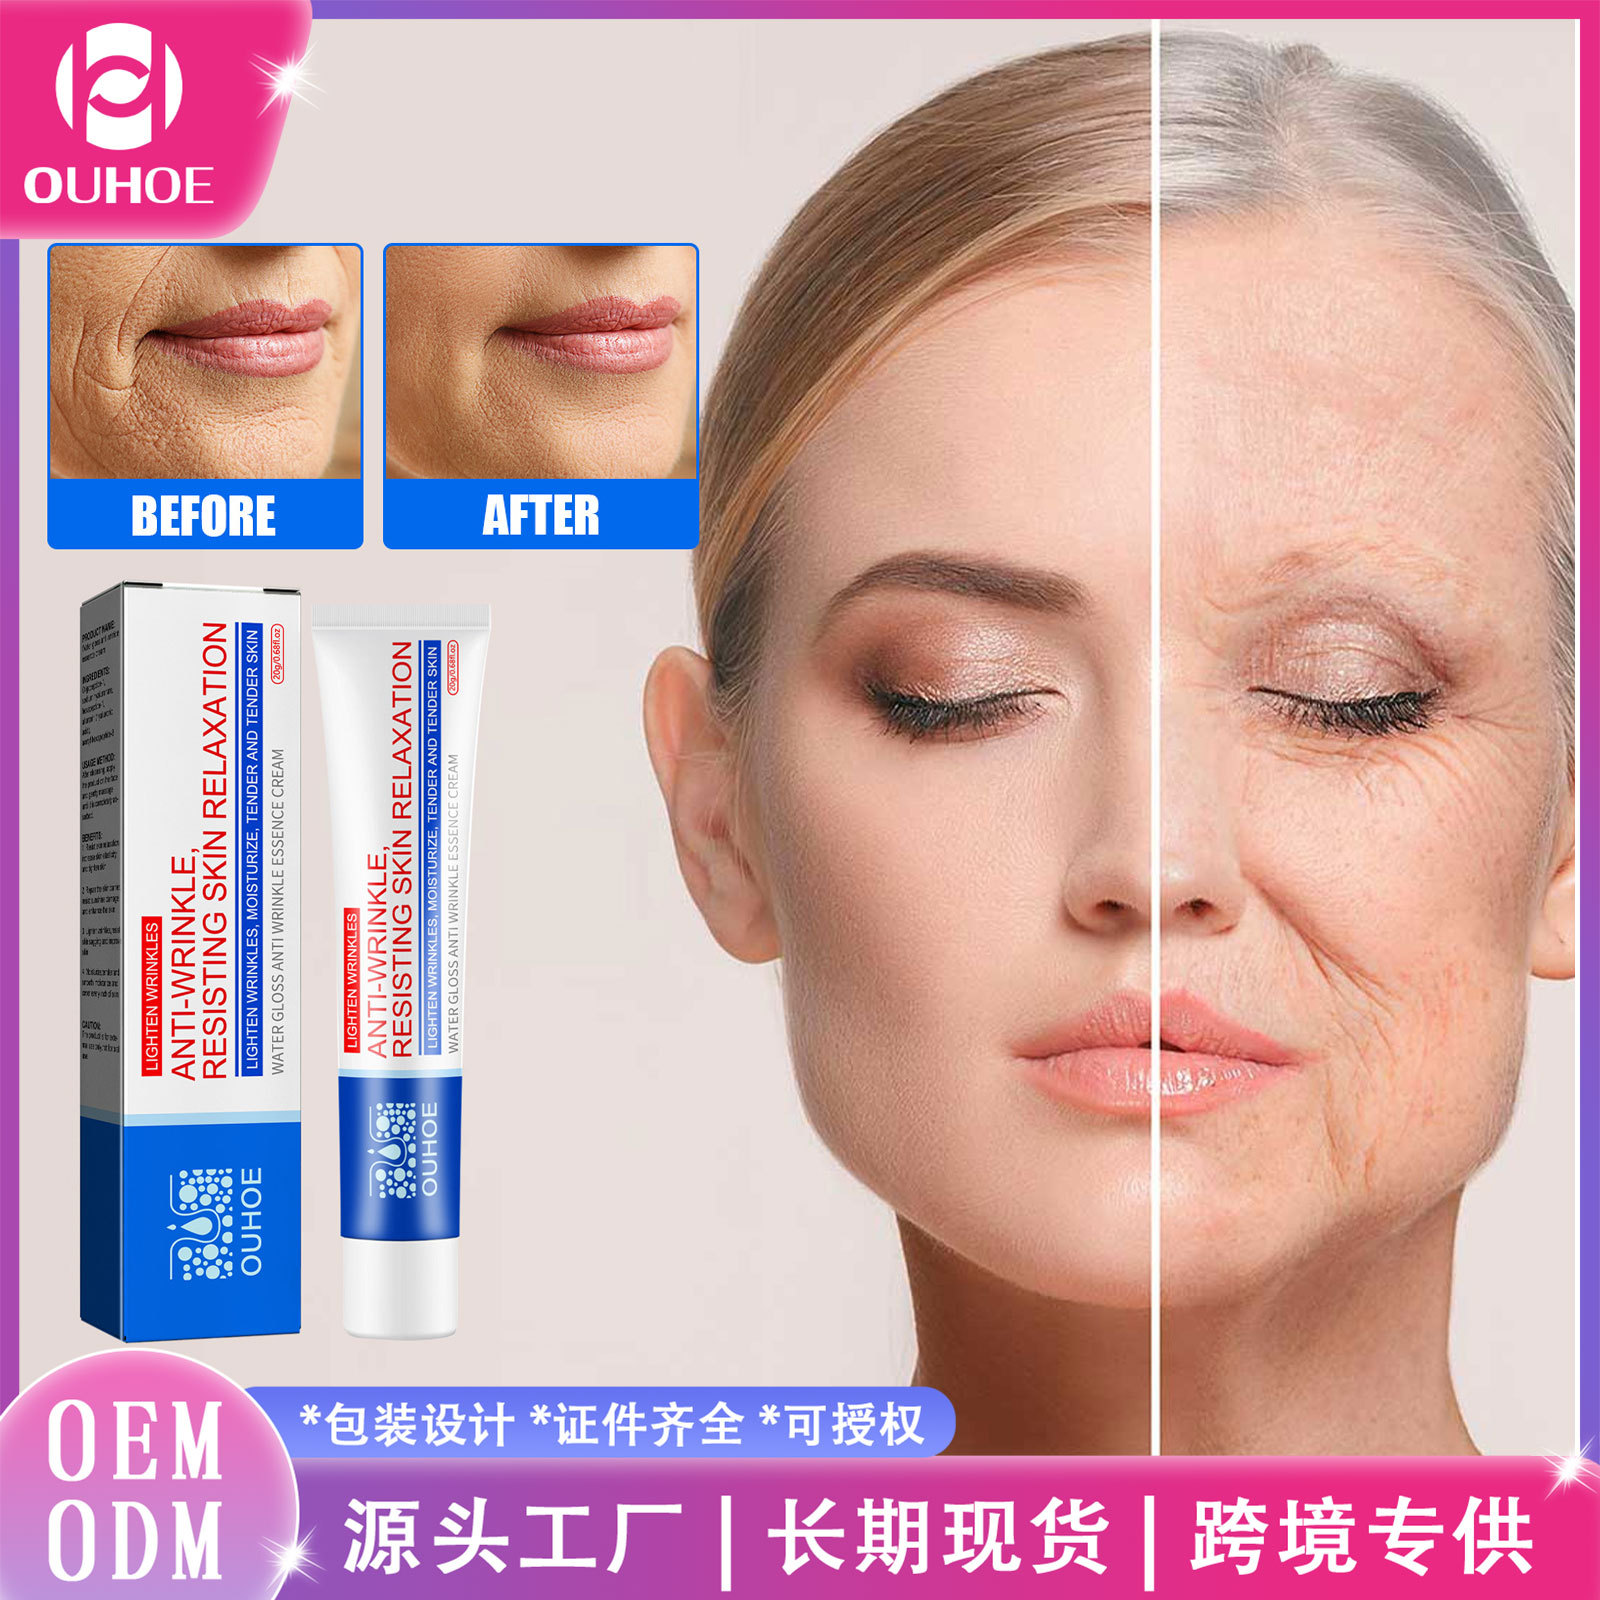 Ouhoe Water Light Anti-Wrinkle Essence Cream Firming Skin Smoothing Fine Lines Moisture Replenishment Anti-Wrinkle Anti-Aging Essence Cream